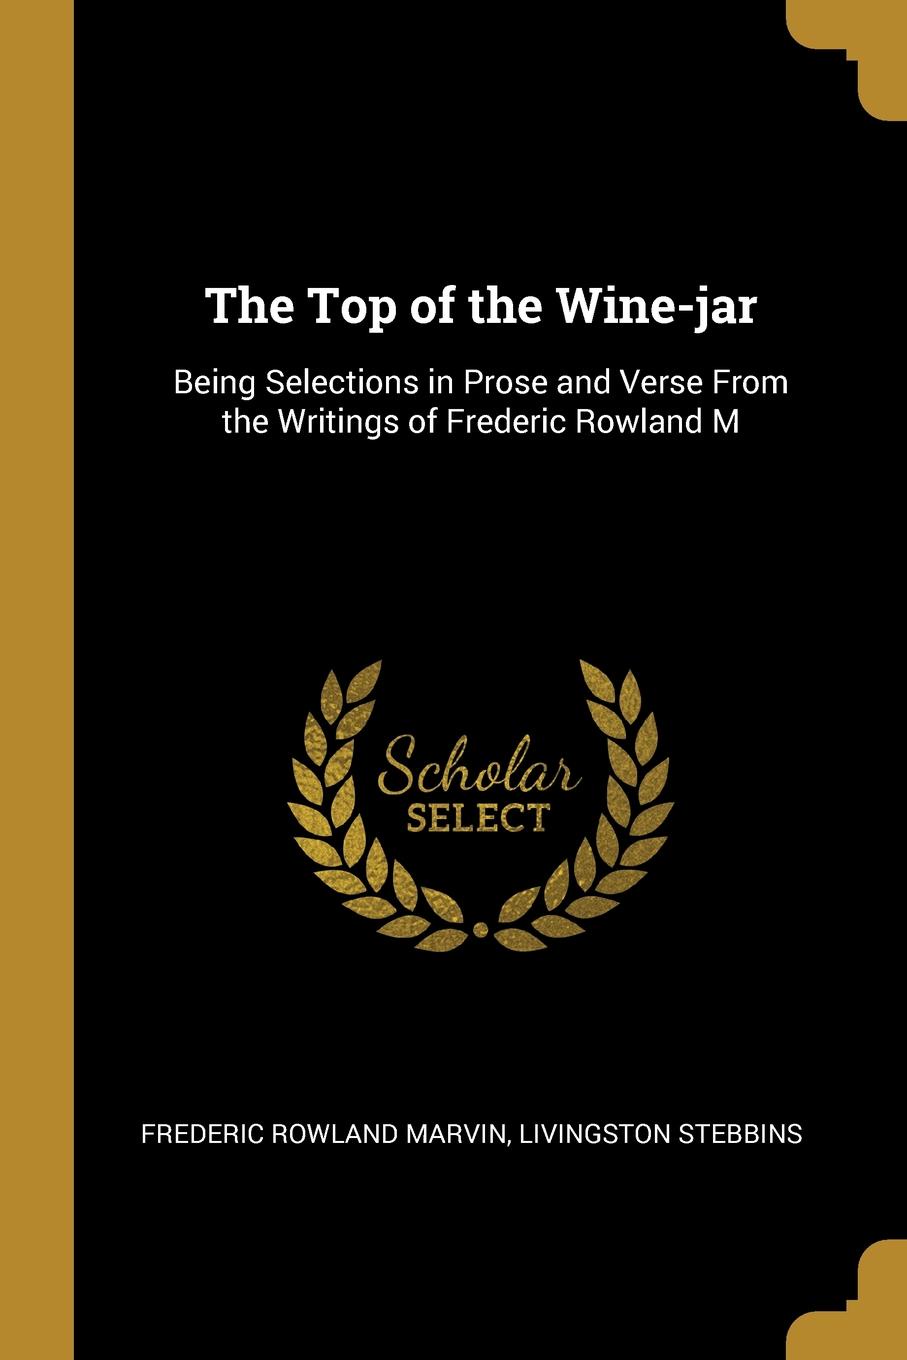 The Top of the Wine-jar. Being Selections in Prose and Verse From the Writings of Frederic Rowland M